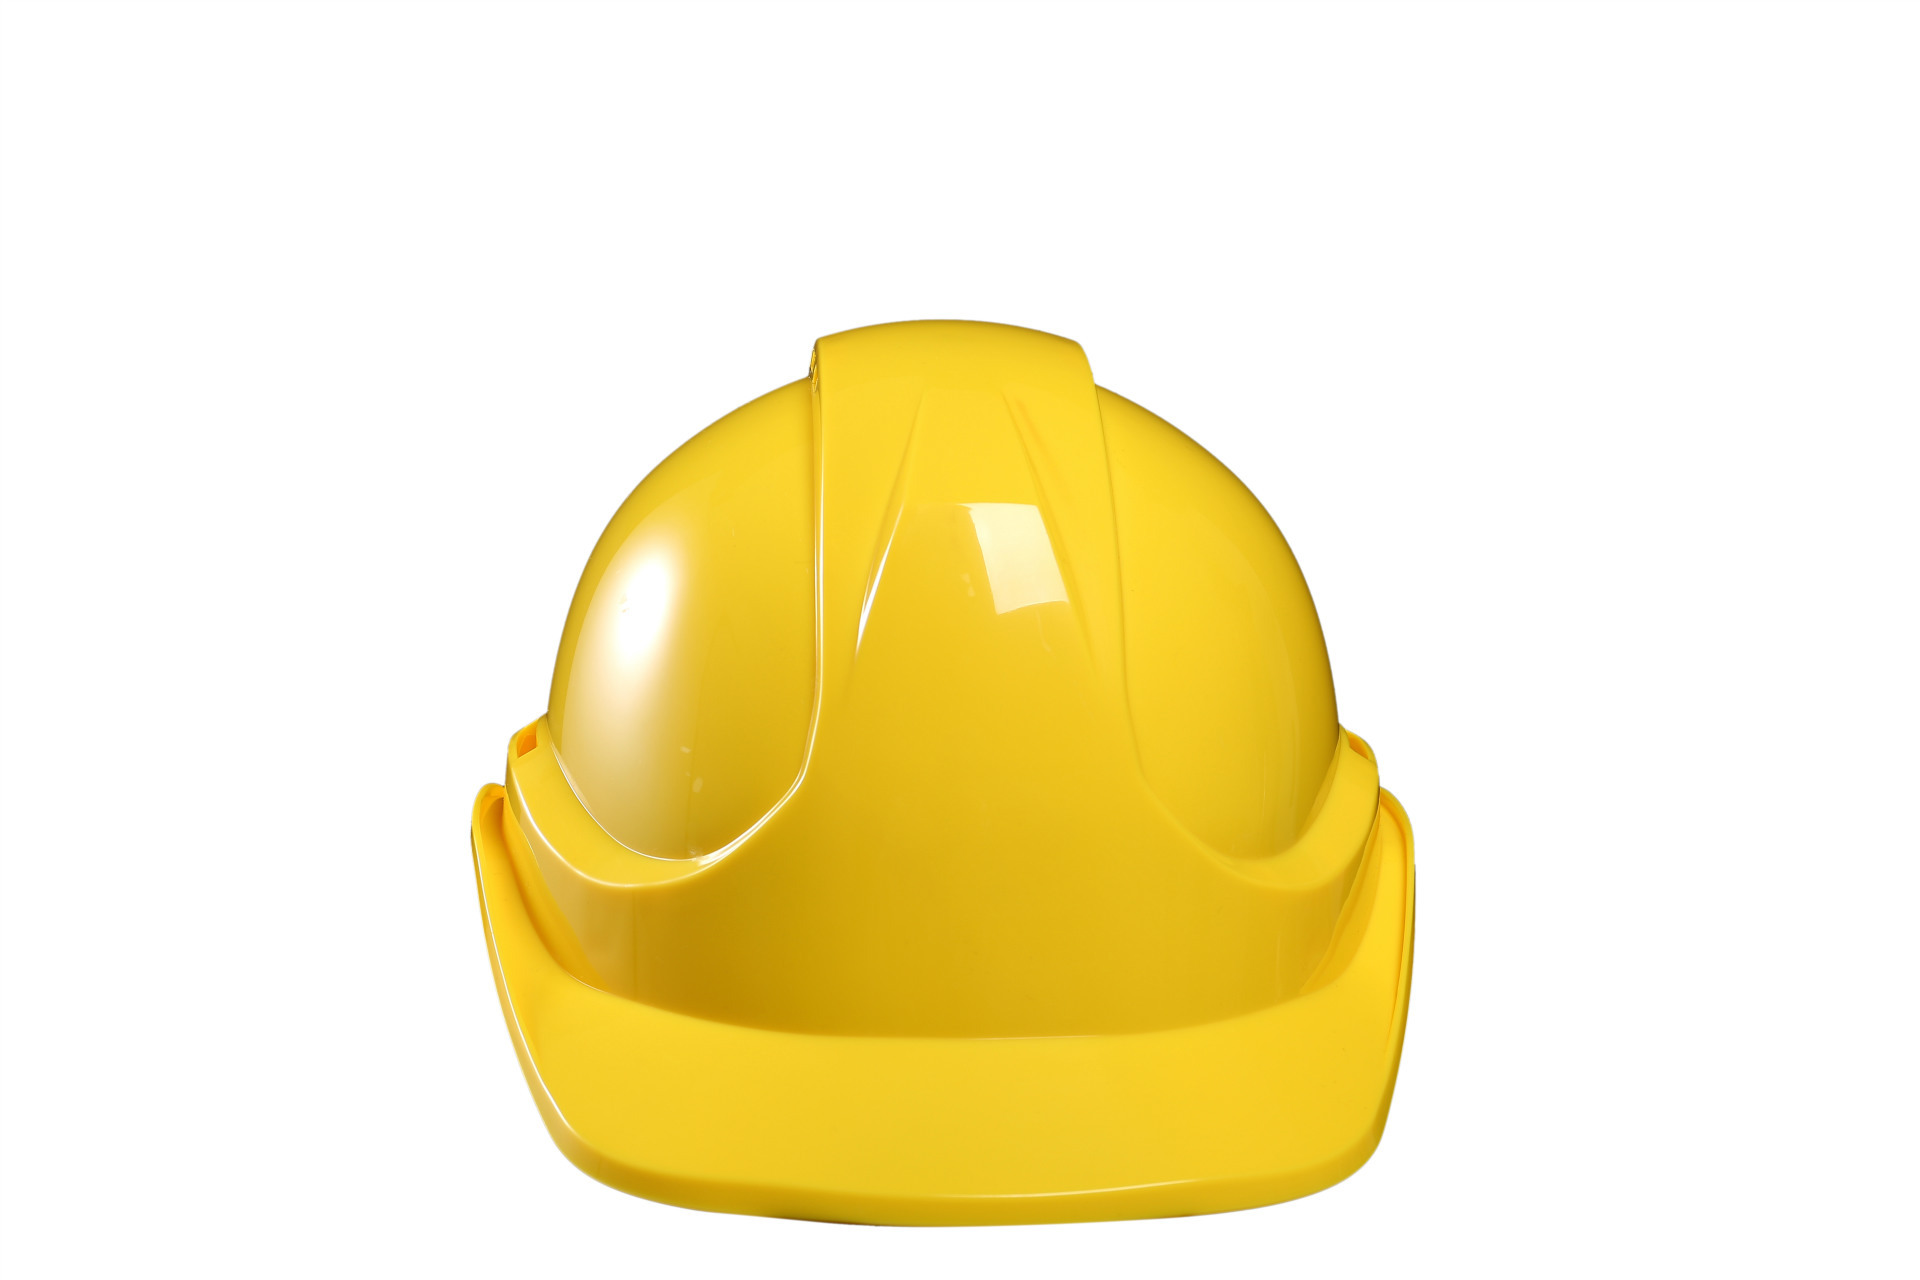 CE EN397 Approved electrical engineering safety helmet hard hat for electrical work